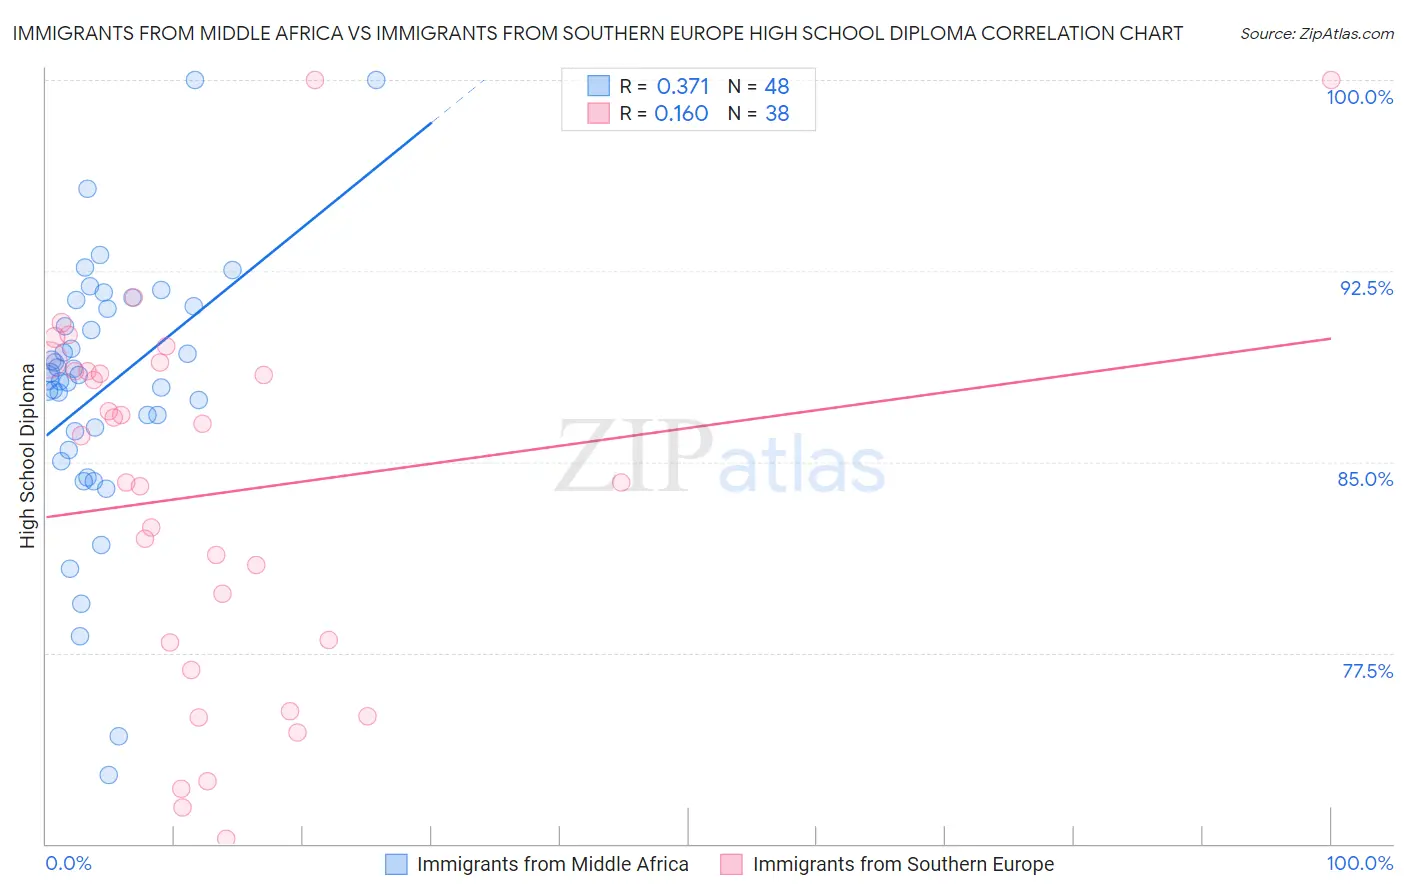 Immigrants from Middle Africa vs Immigrants from Southern Europe High School Diploma